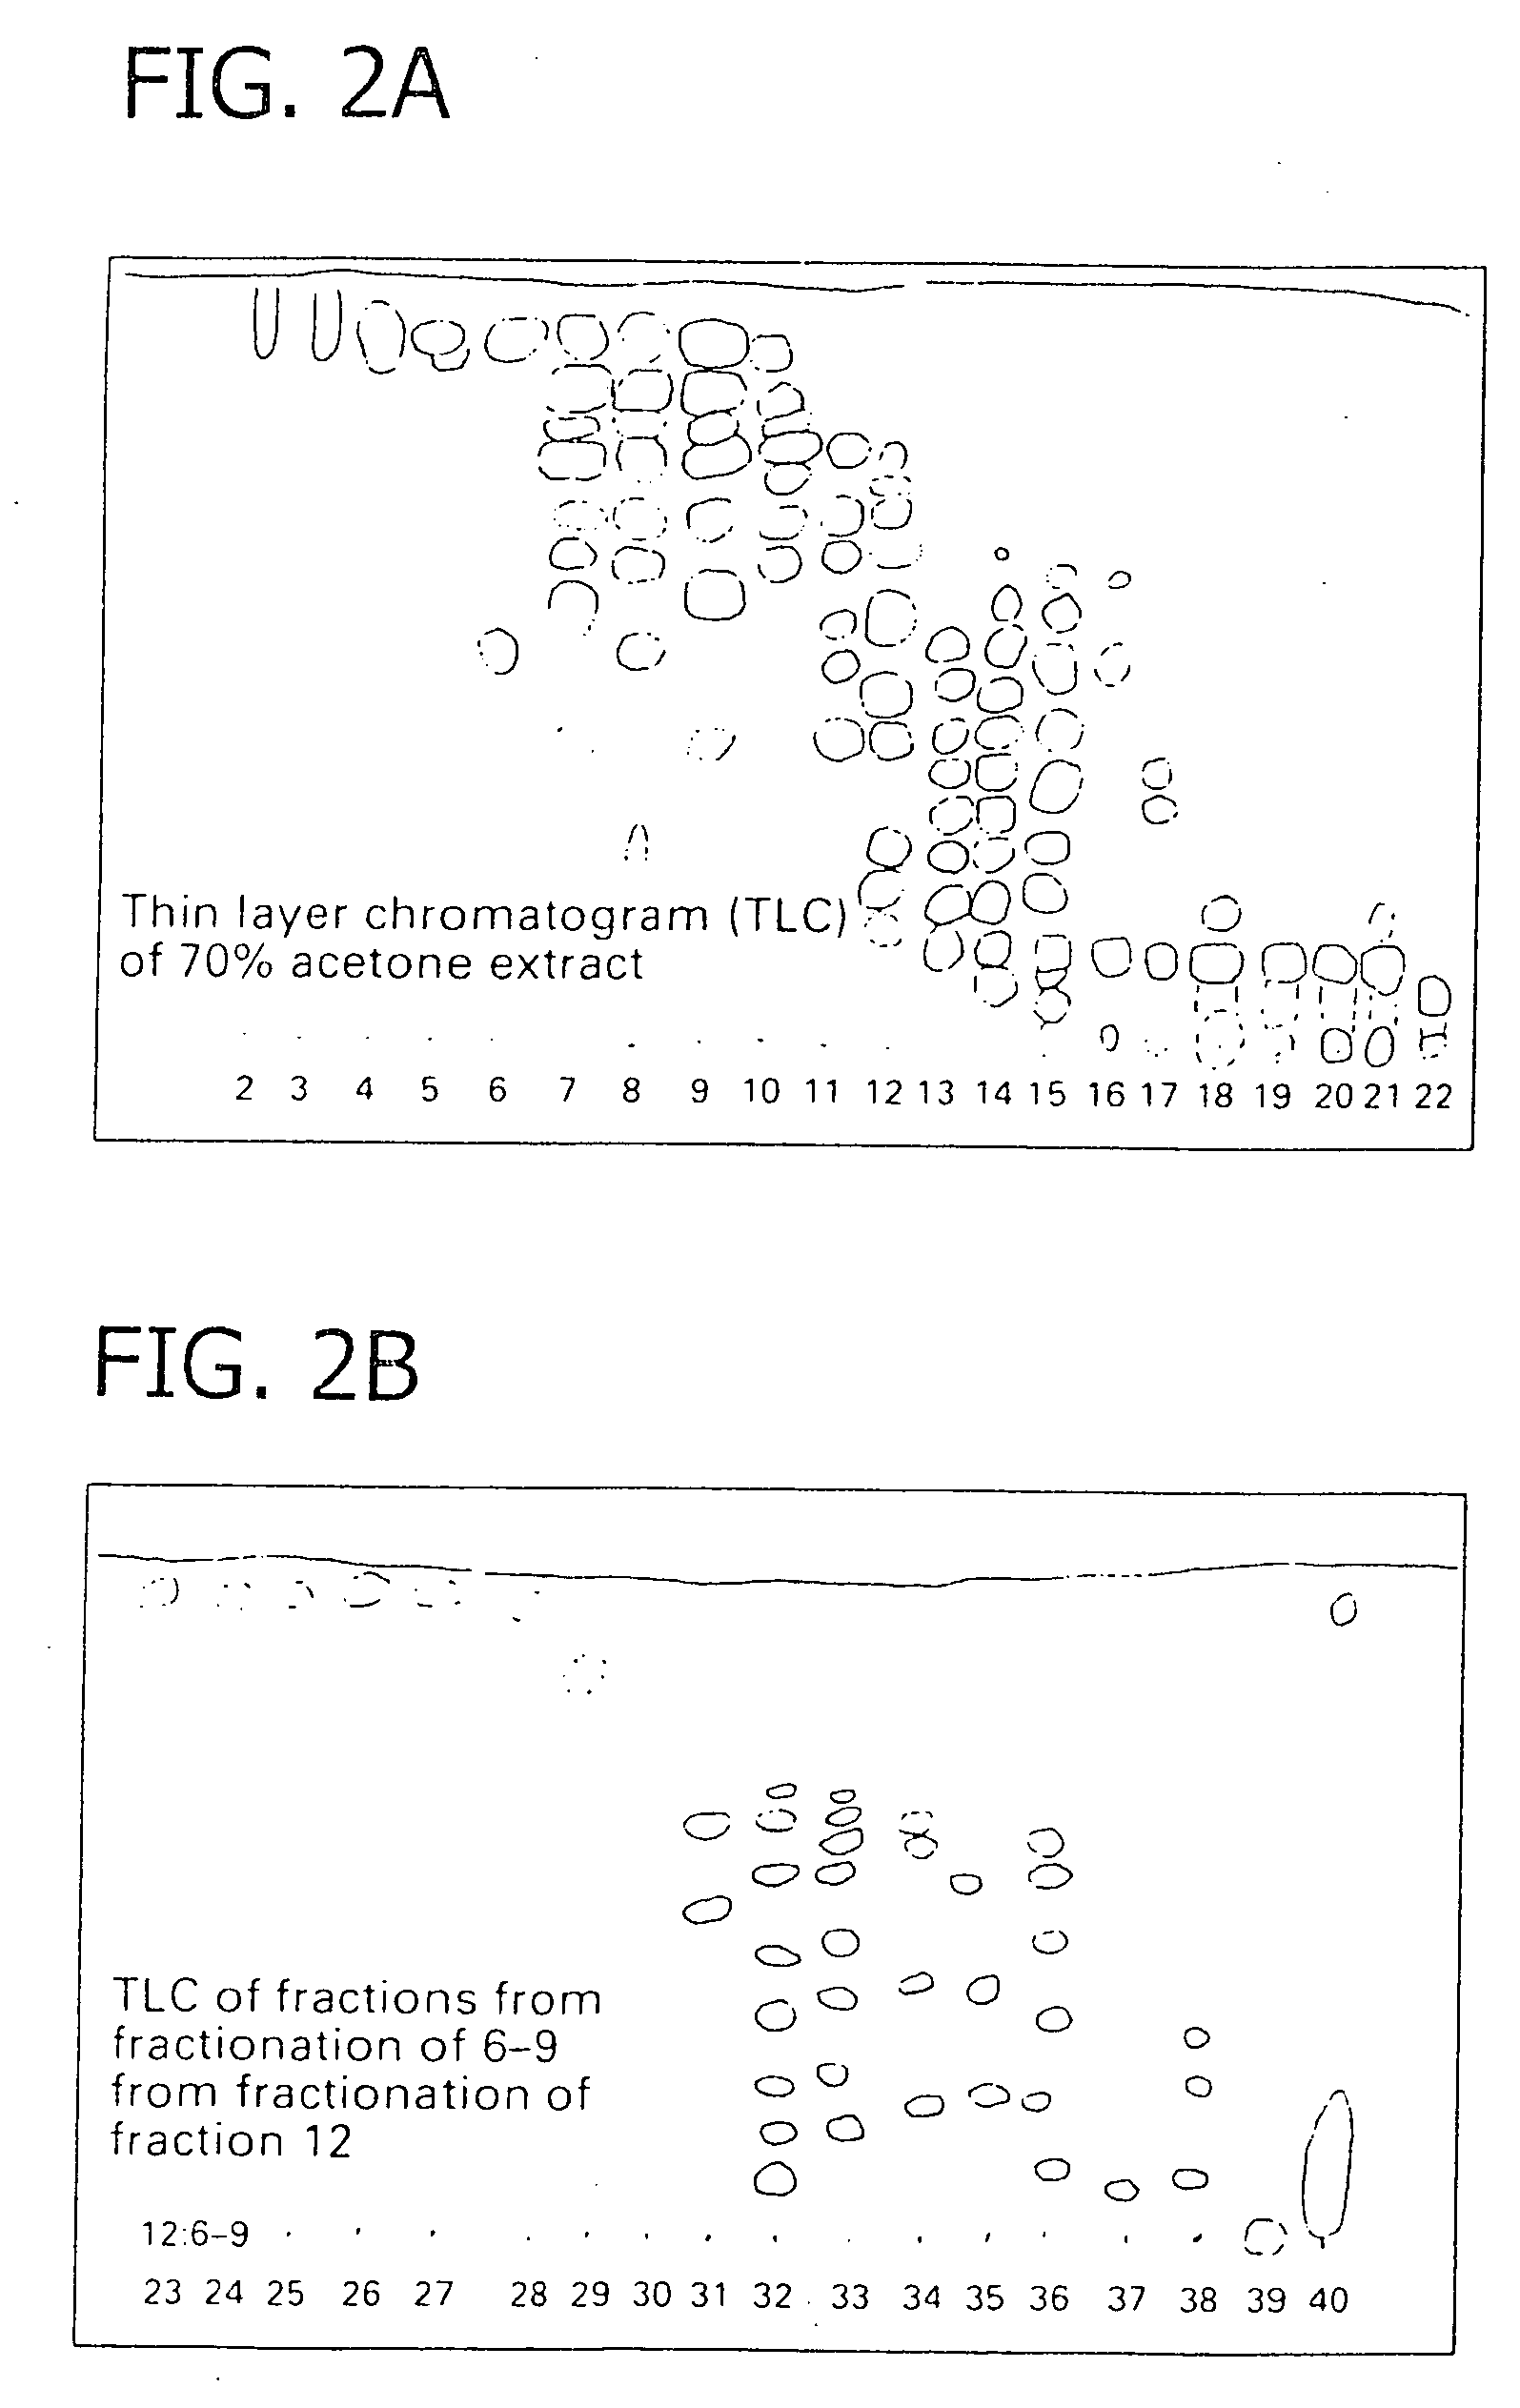 Methods for isolation of proanthocyanidins from flavonoid-producing cell culture